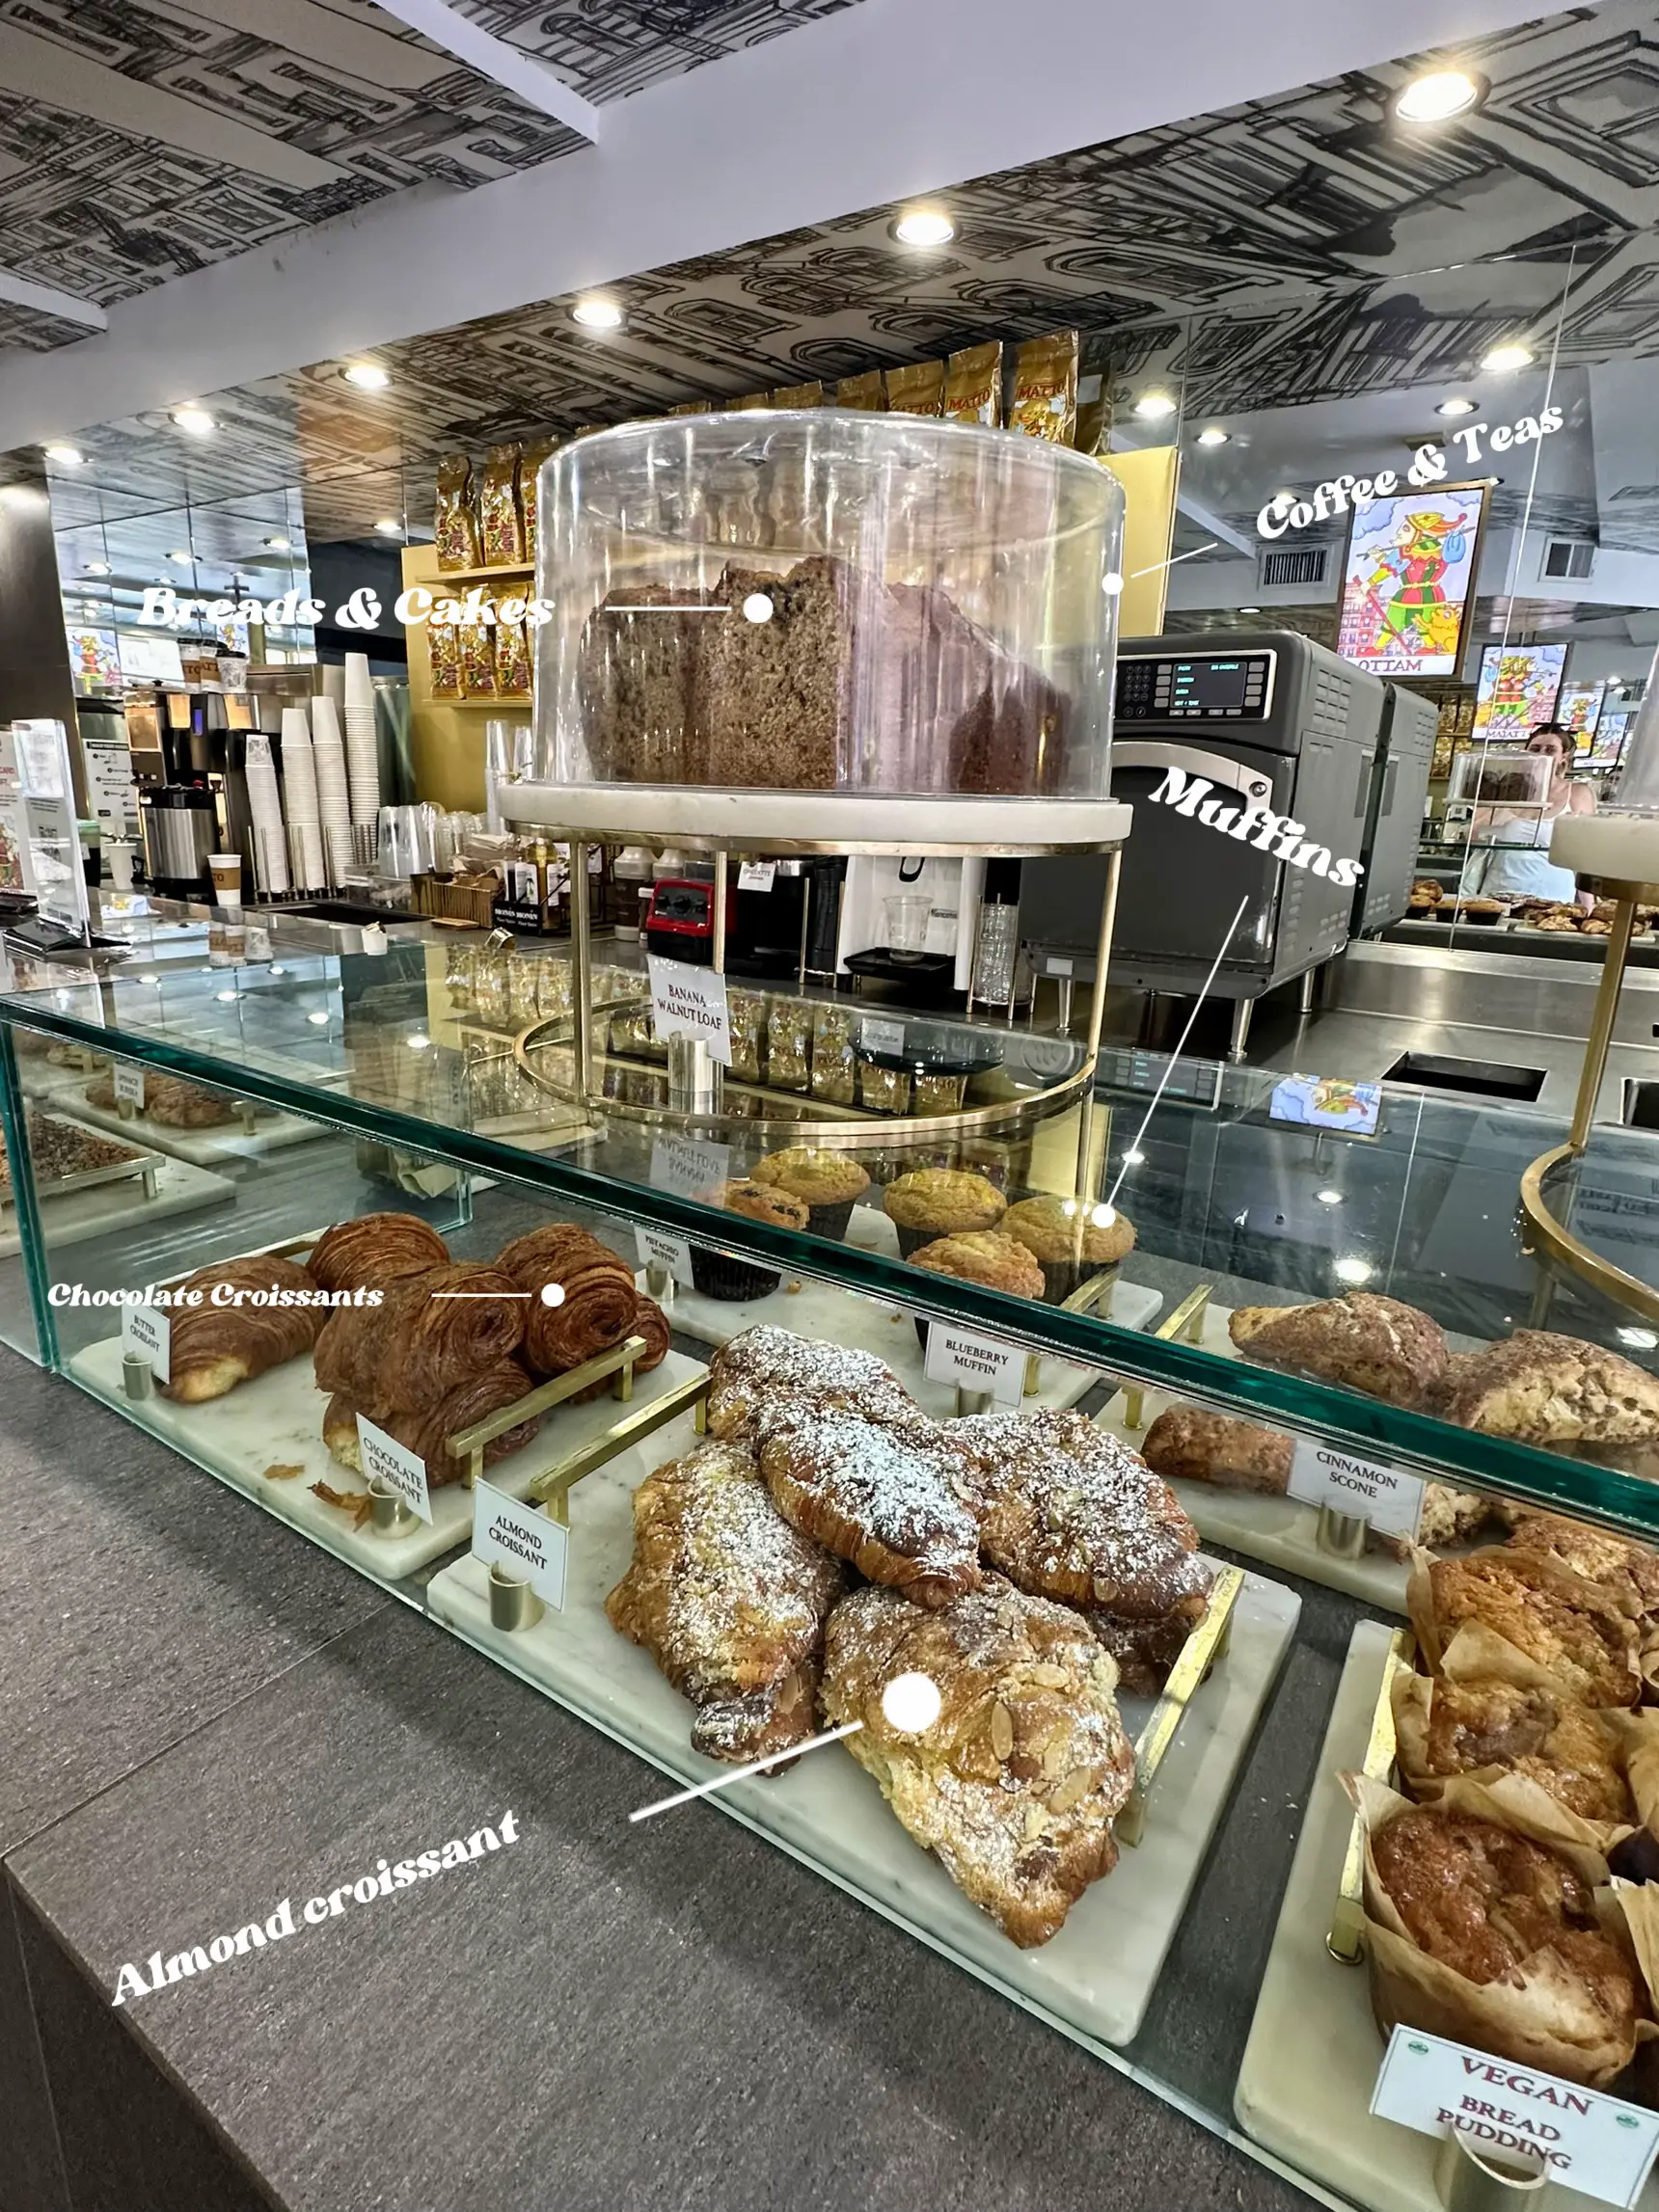  A display of pastries including croissants and almond croissants.